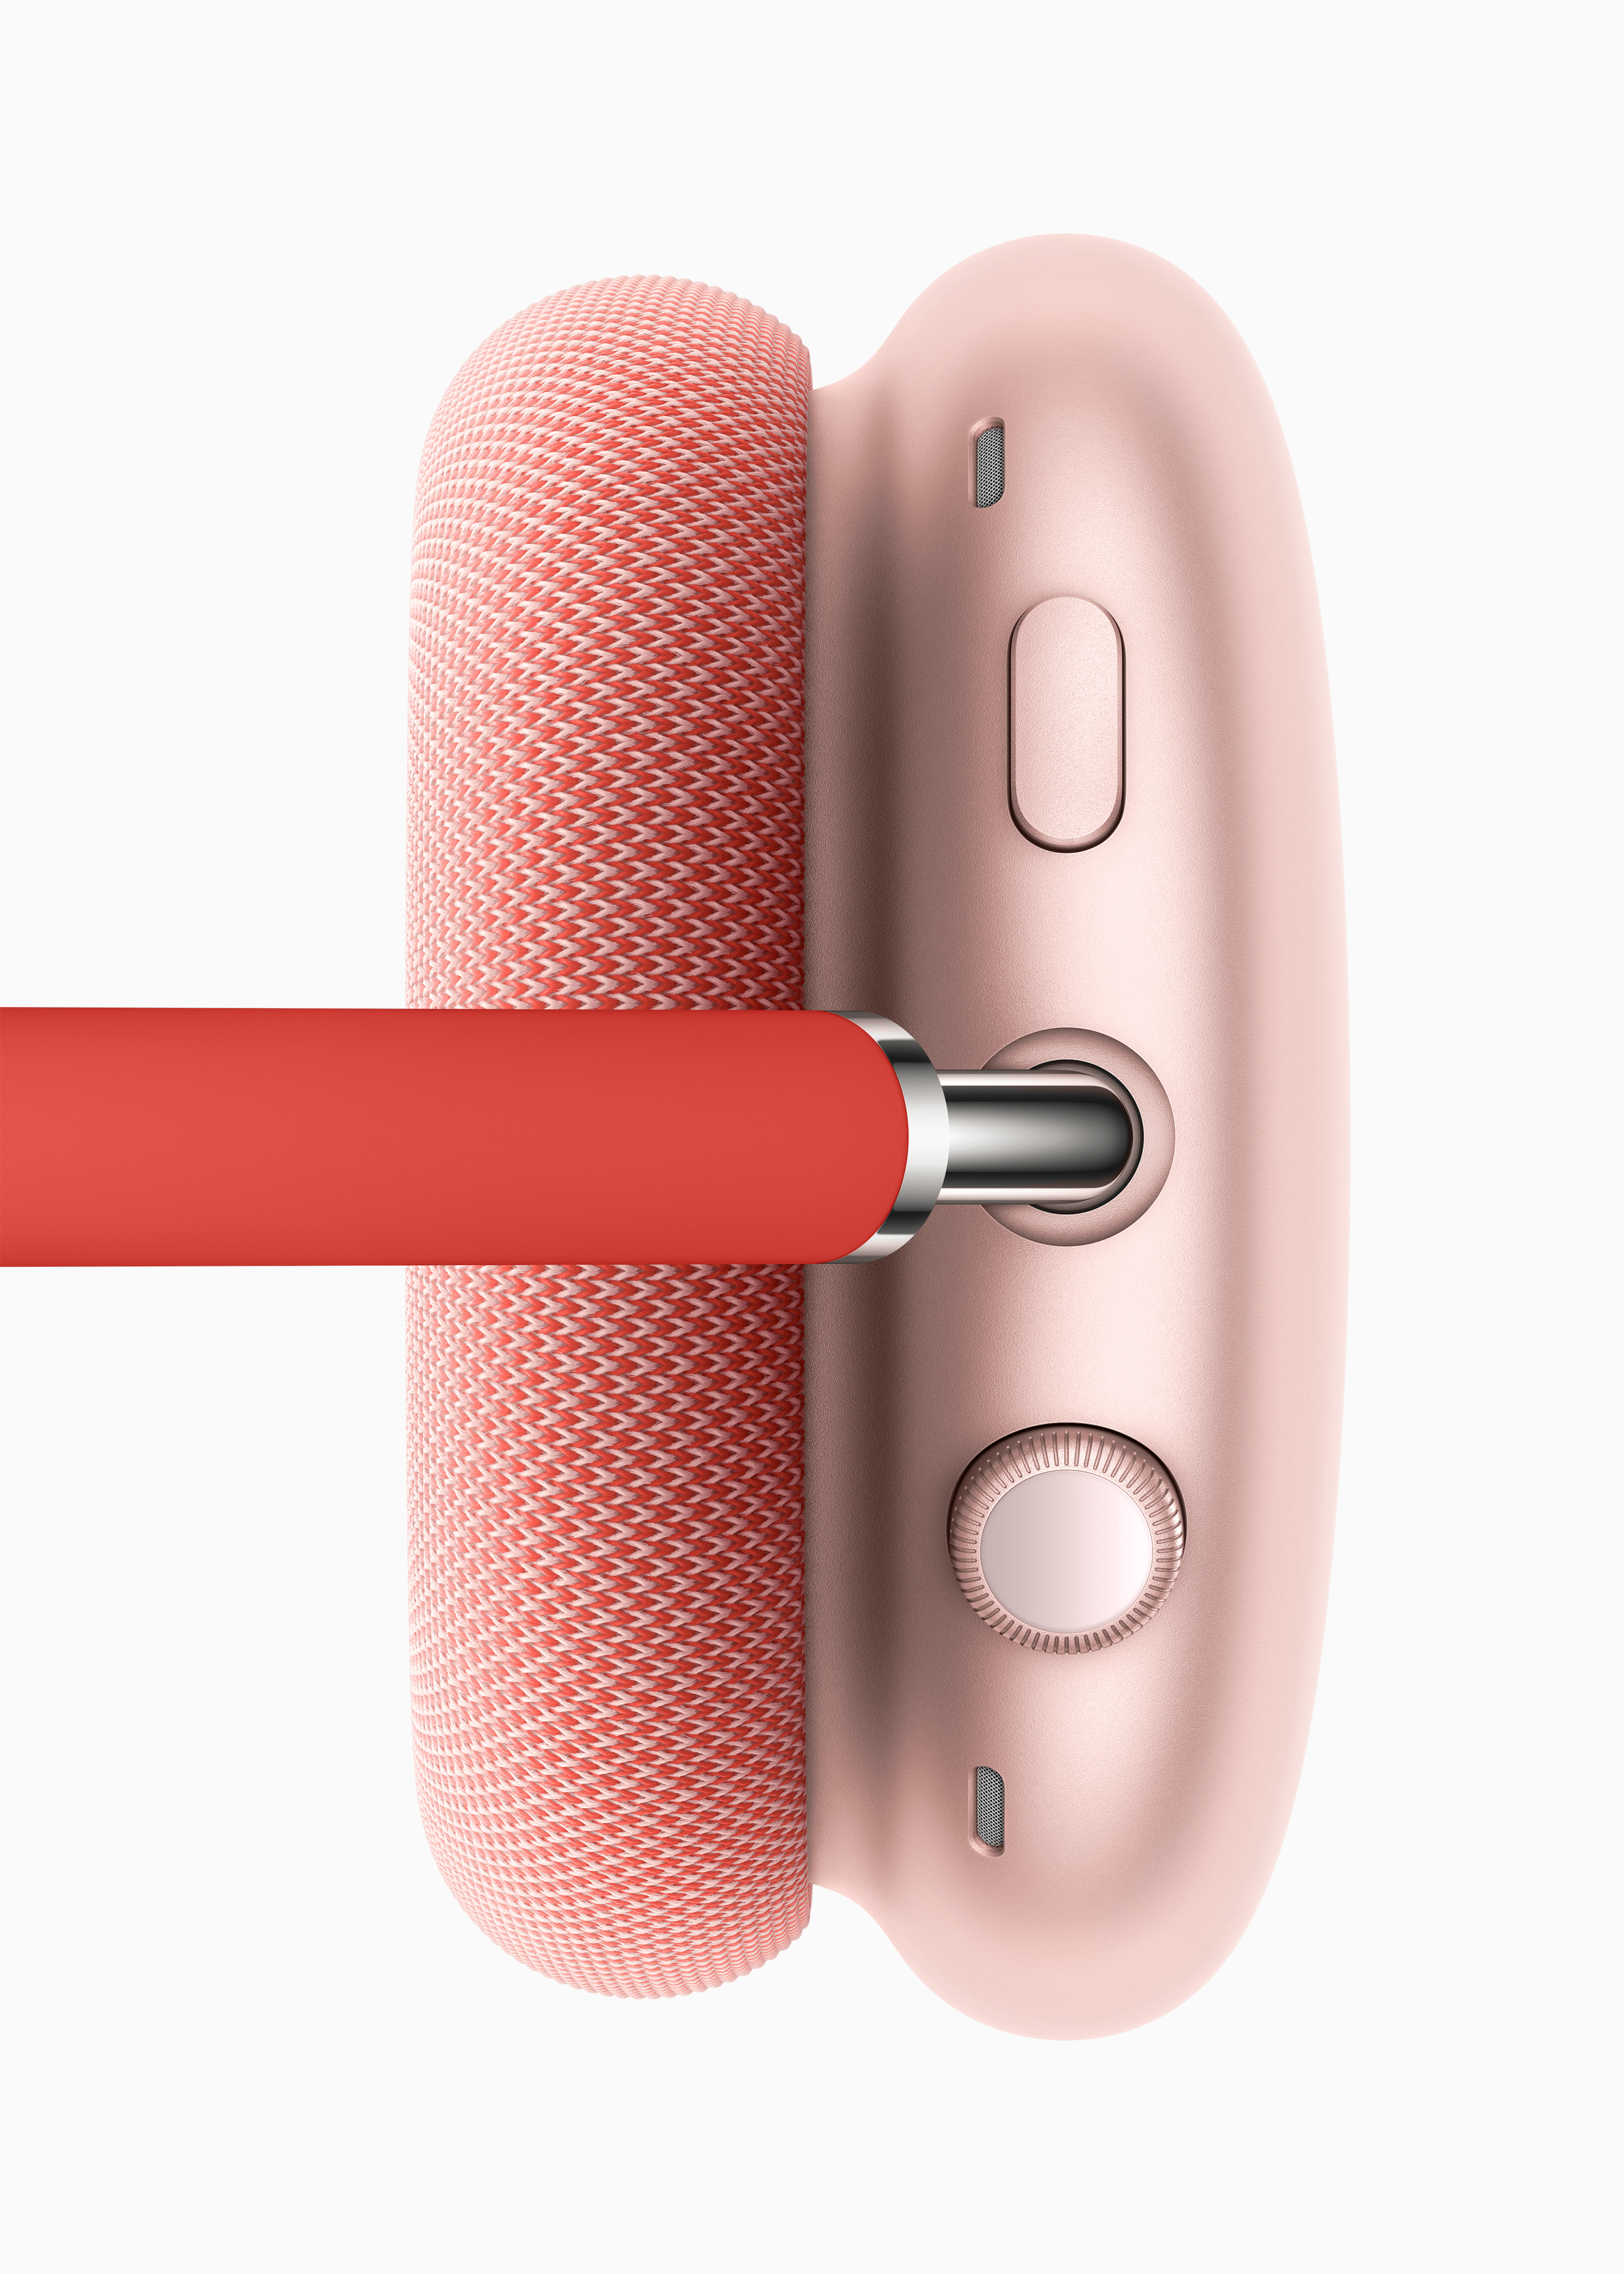 Tech- Gagdet- Features and Specifications of Apple's AirPods Max